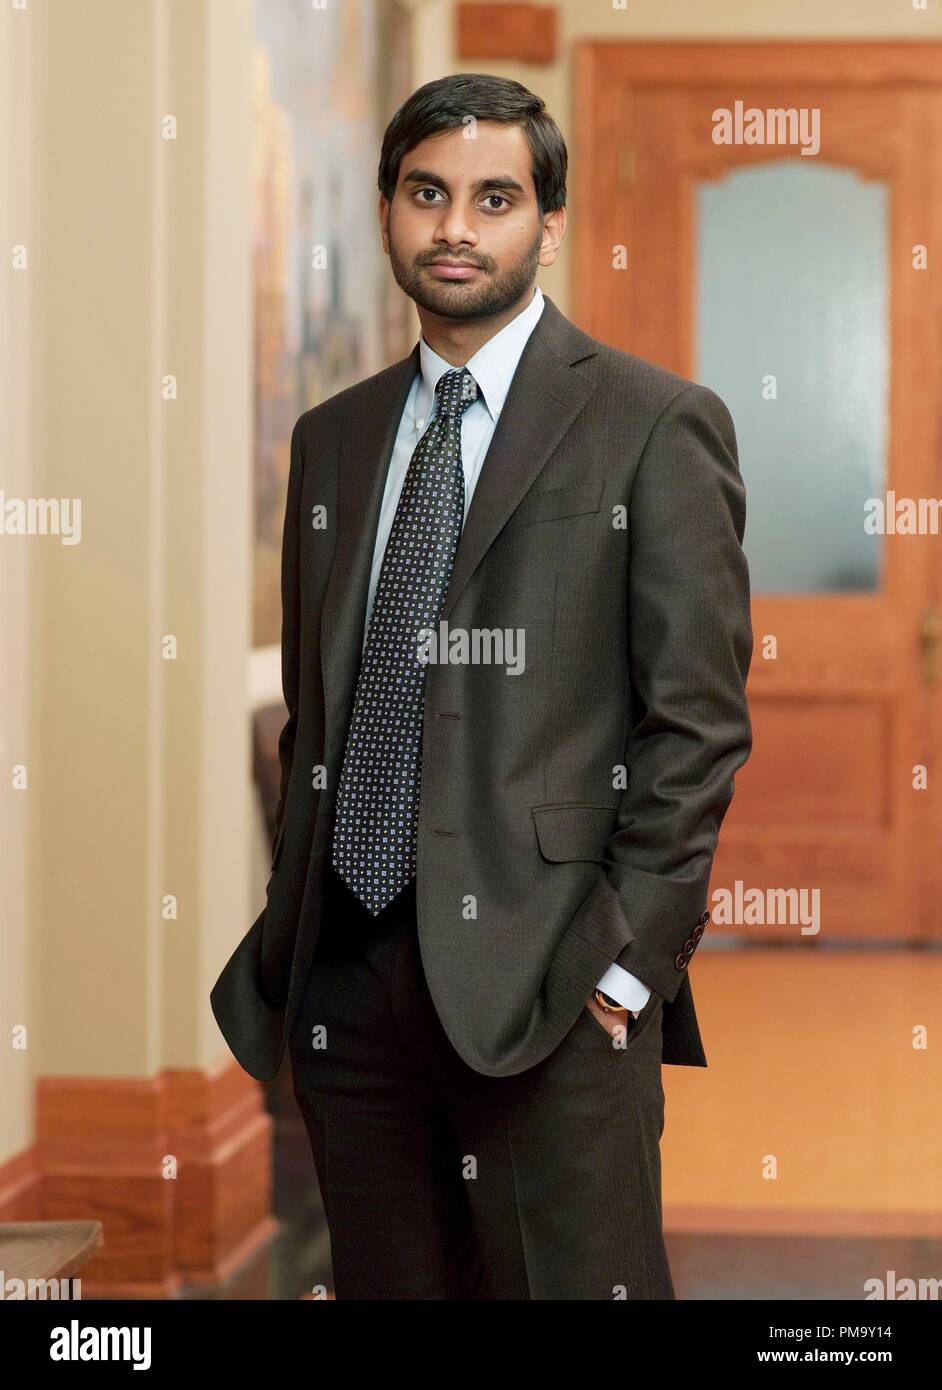 PARKS AND RECREATION -- Pictured: Aziz Ansari as Tom Haverford Stock Photo  - Alamy